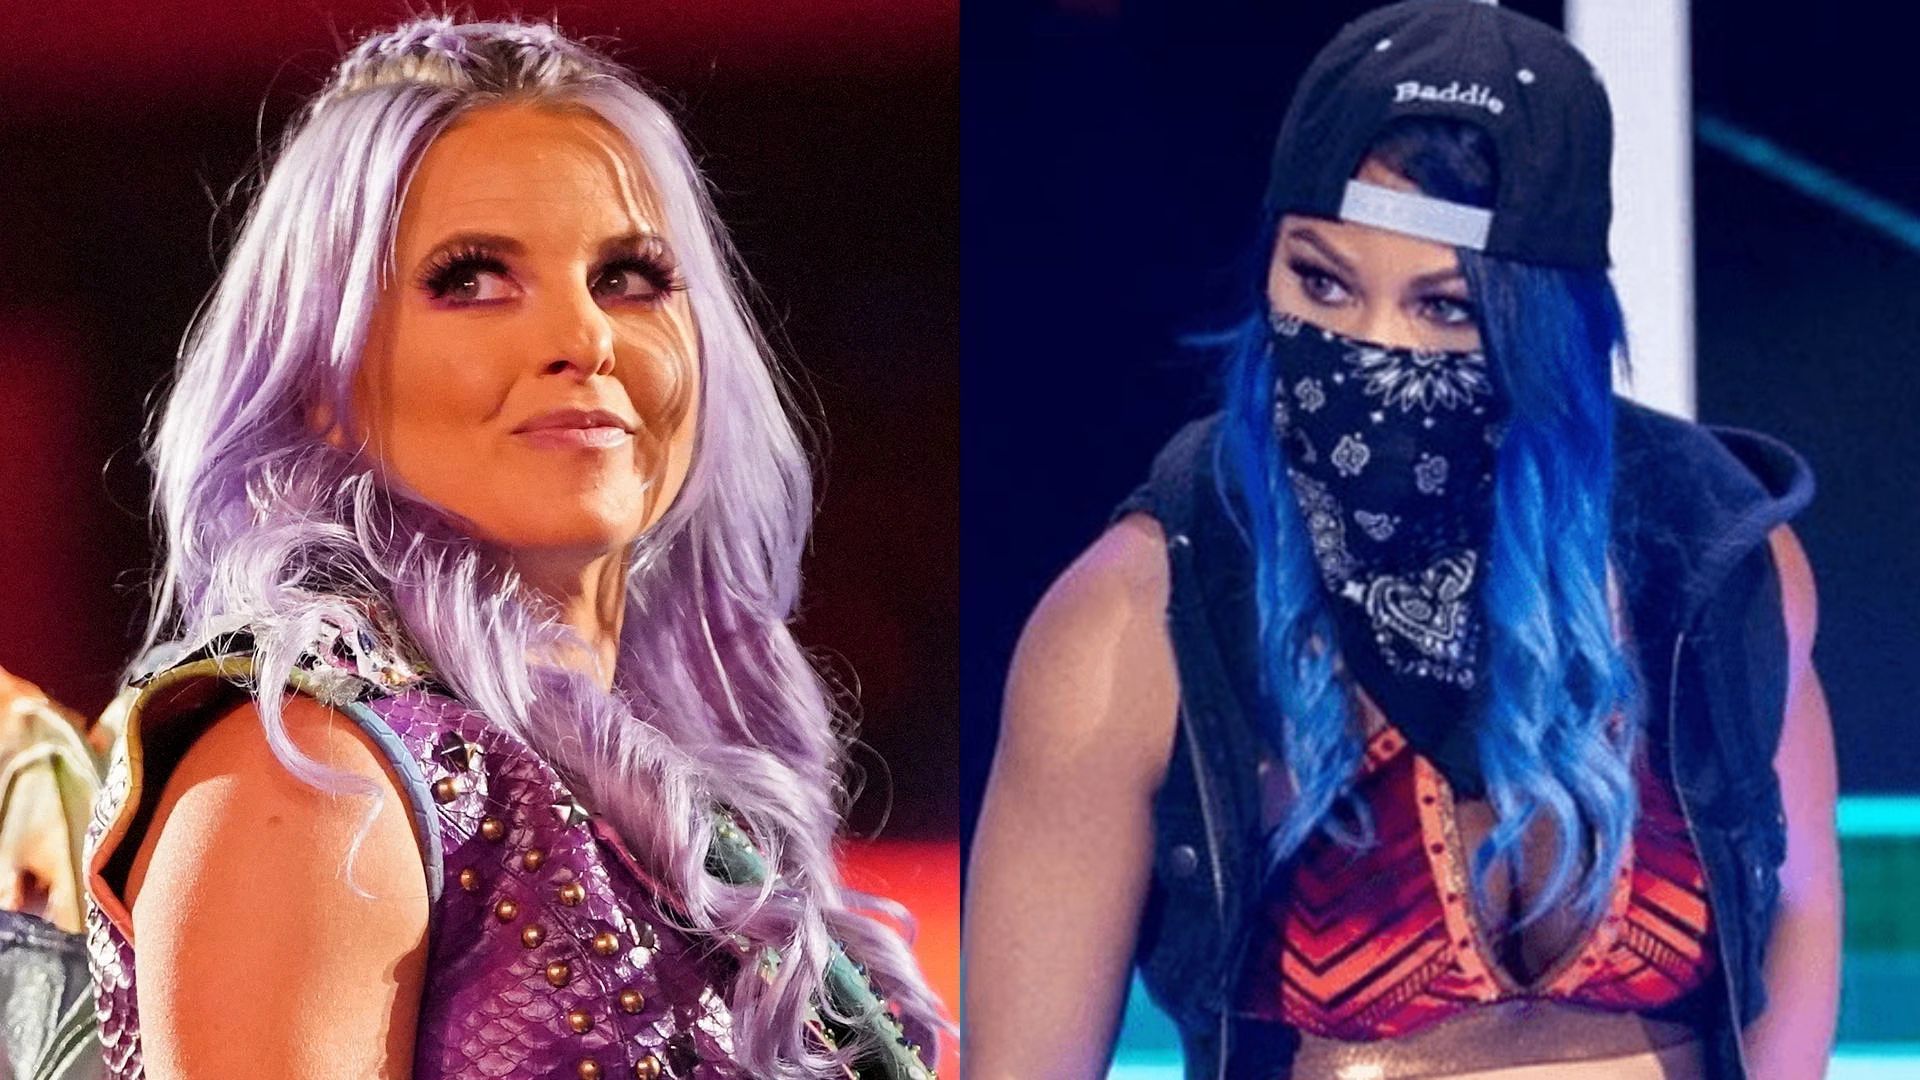 Other former WWE and NXT Superstars could potentially return following Candice LeRae